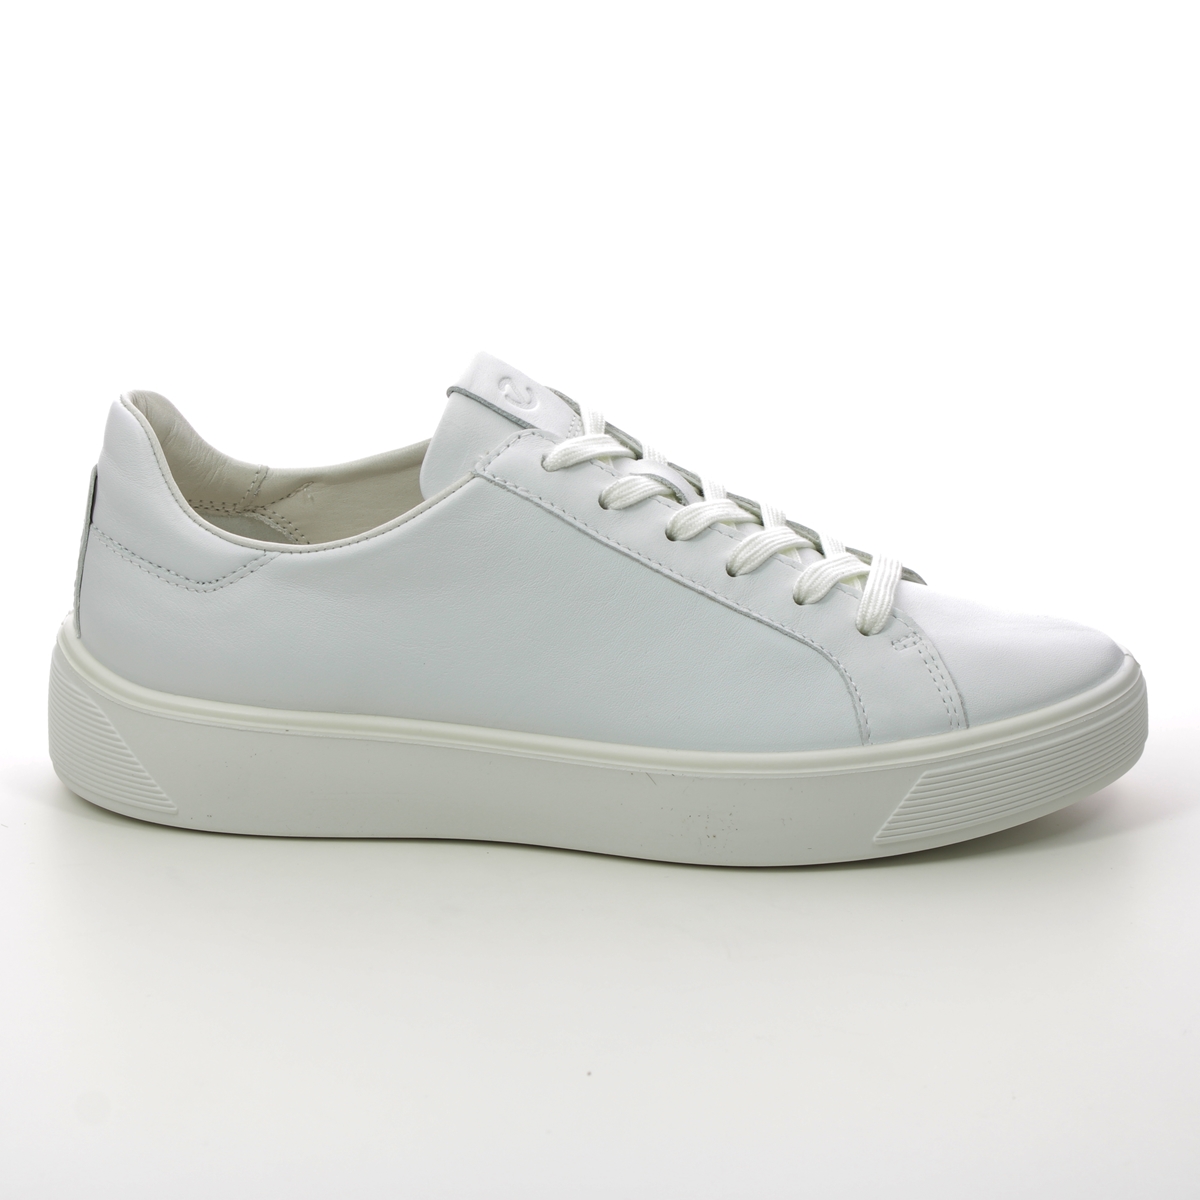 ECCO Street Tray W WHITE LEATHER Womens trainers 291143-01007